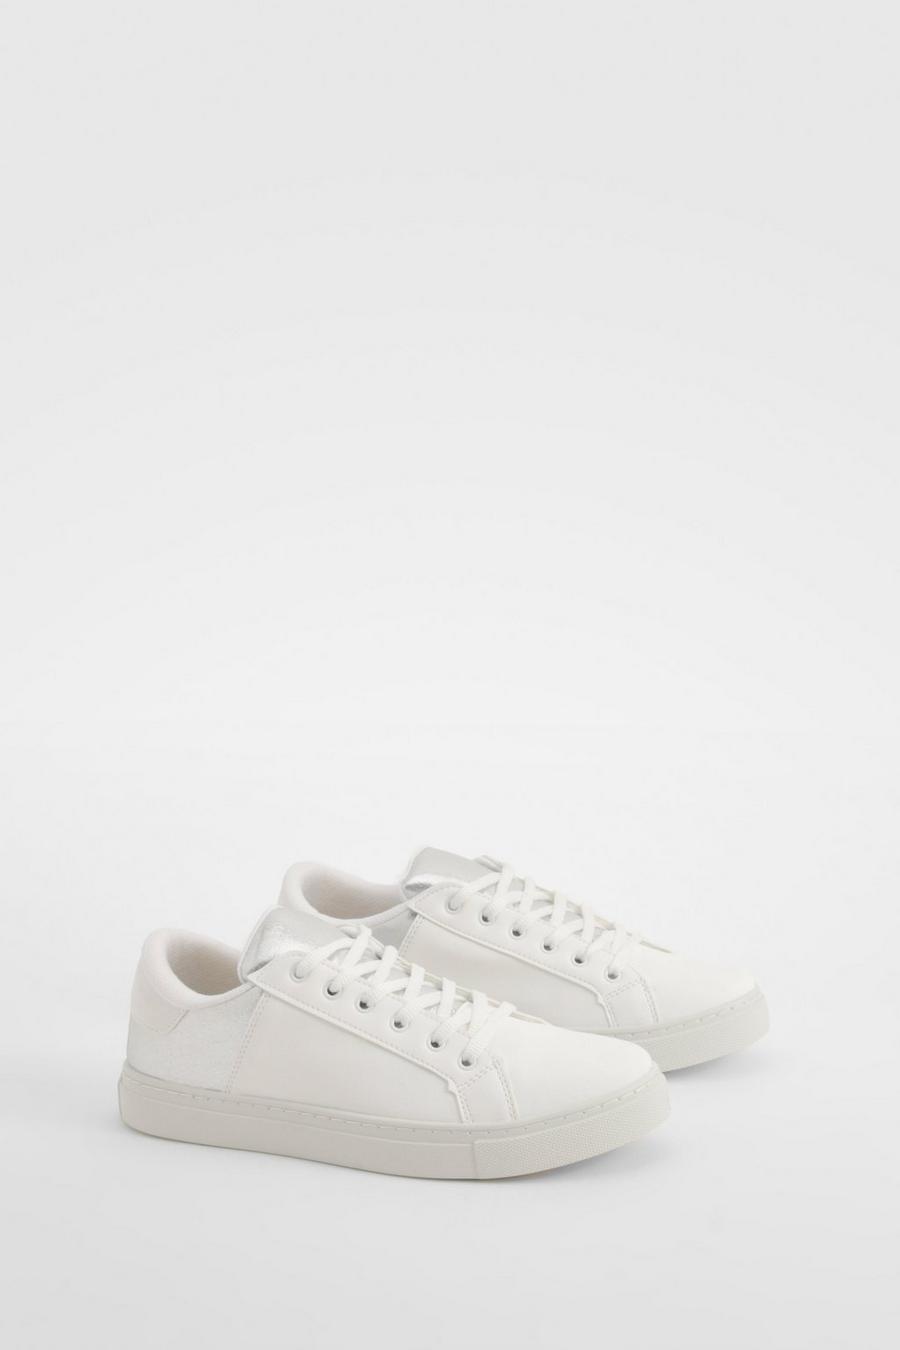 Silver Contrast Panel Basic Flat Trainers  